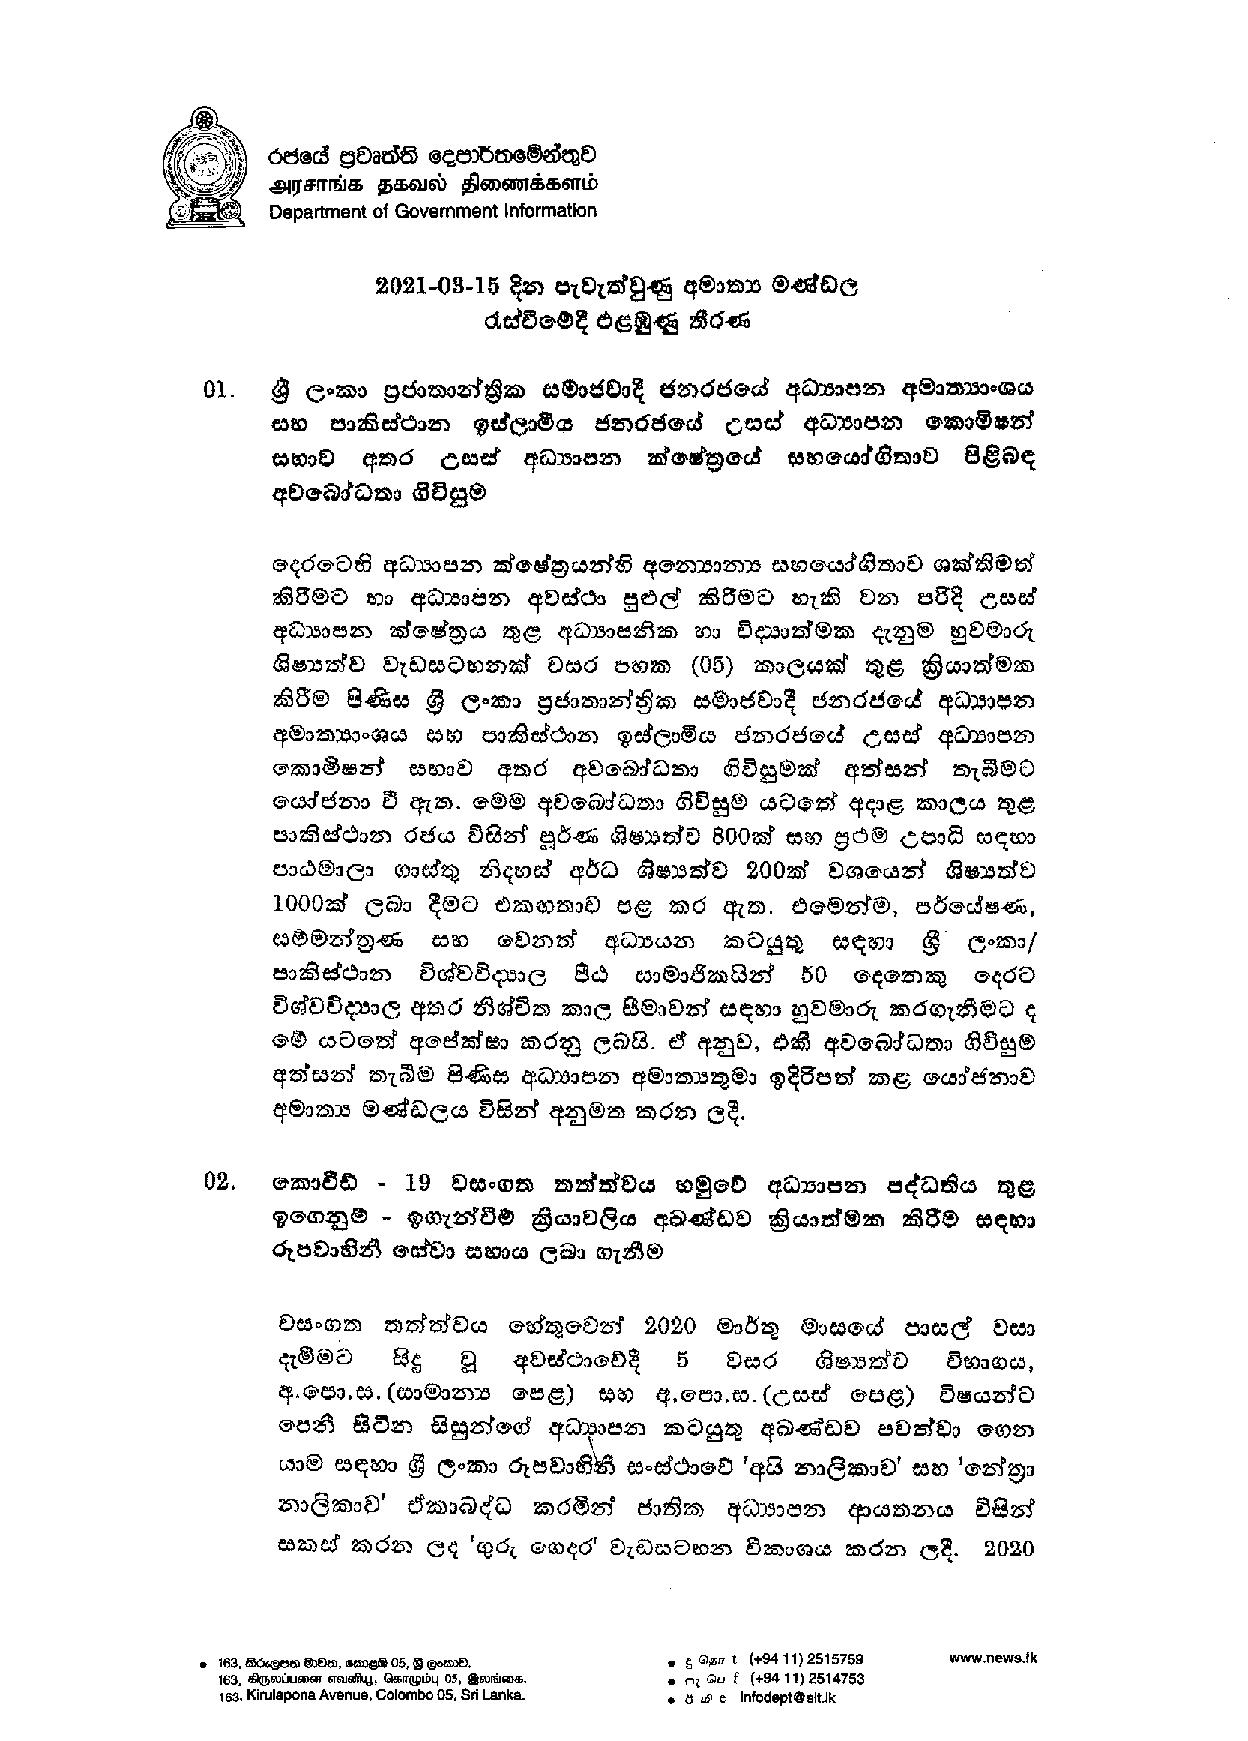 Cabinet Decision on 15.03.2021 page 001